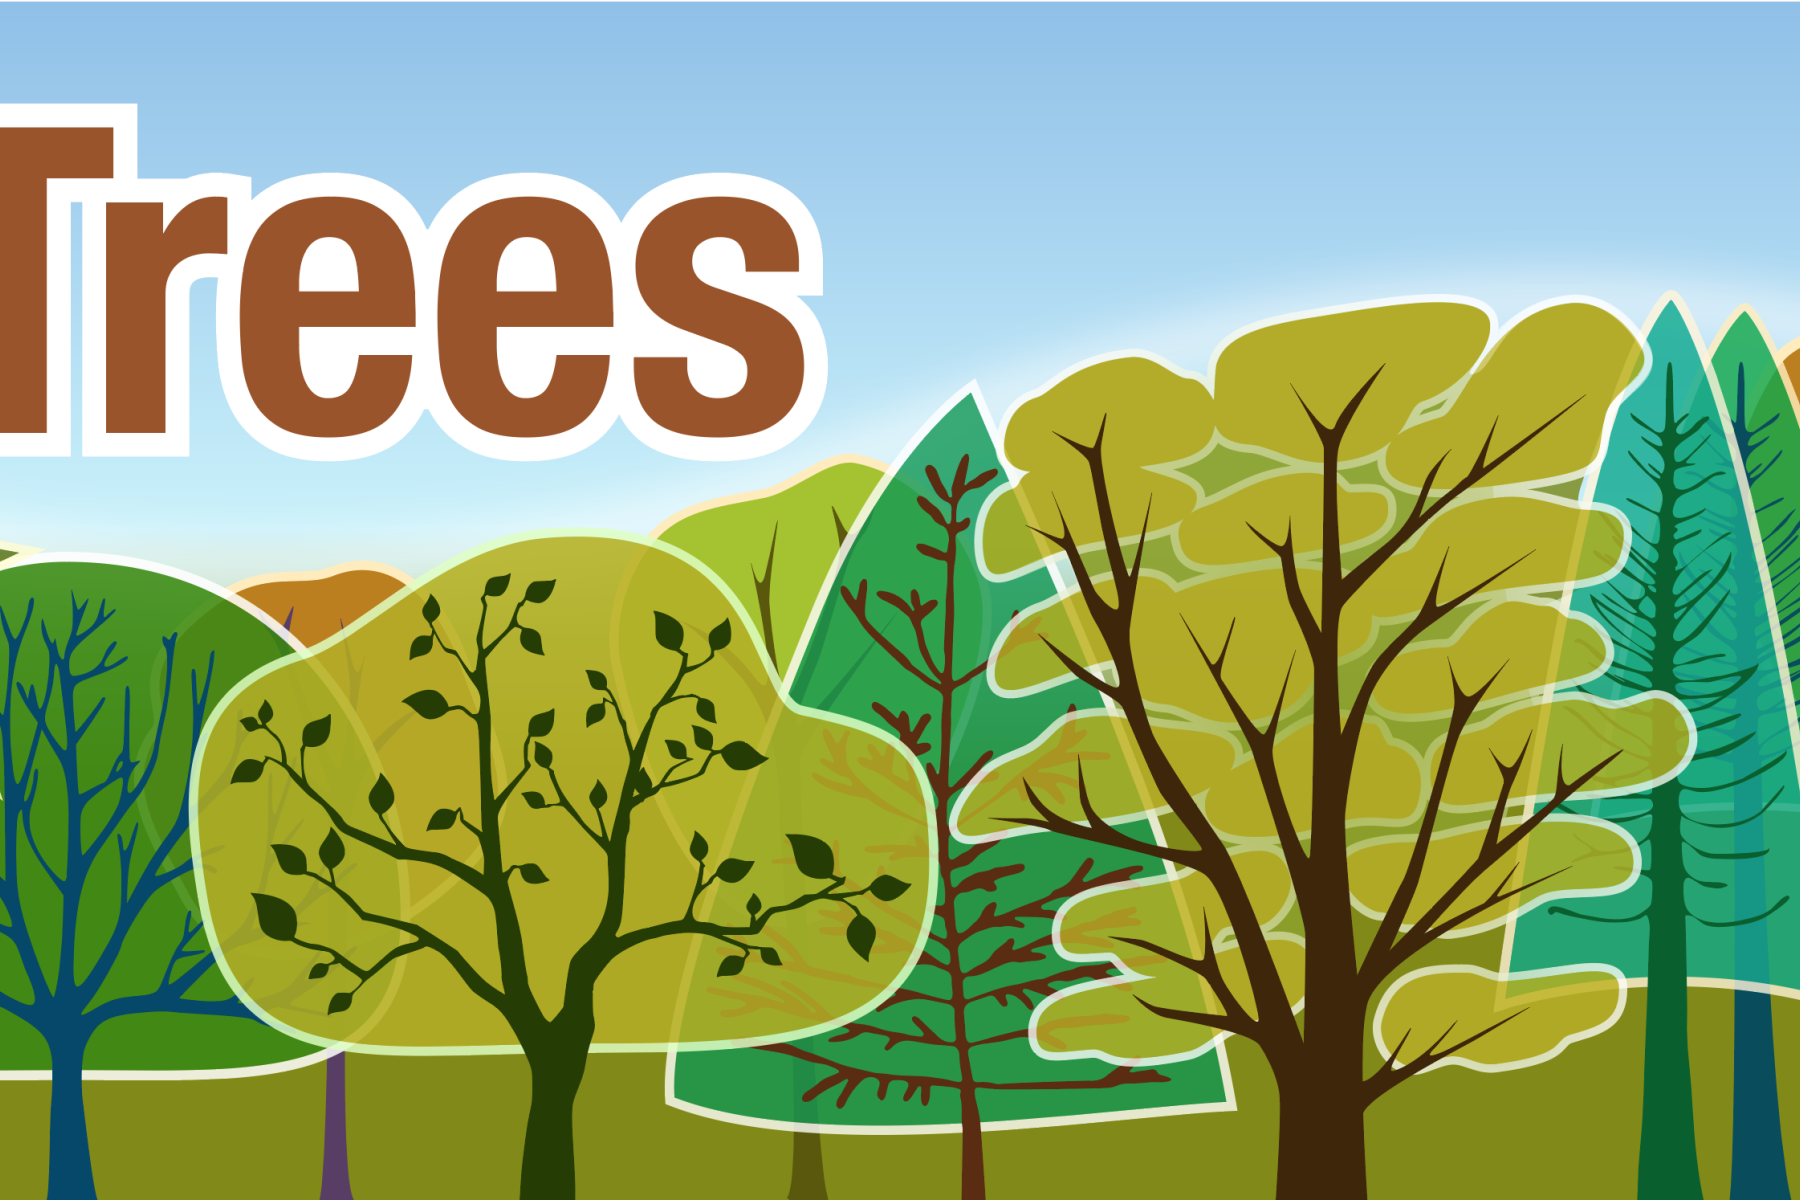 Globe App Trees icon with illustrations of trees